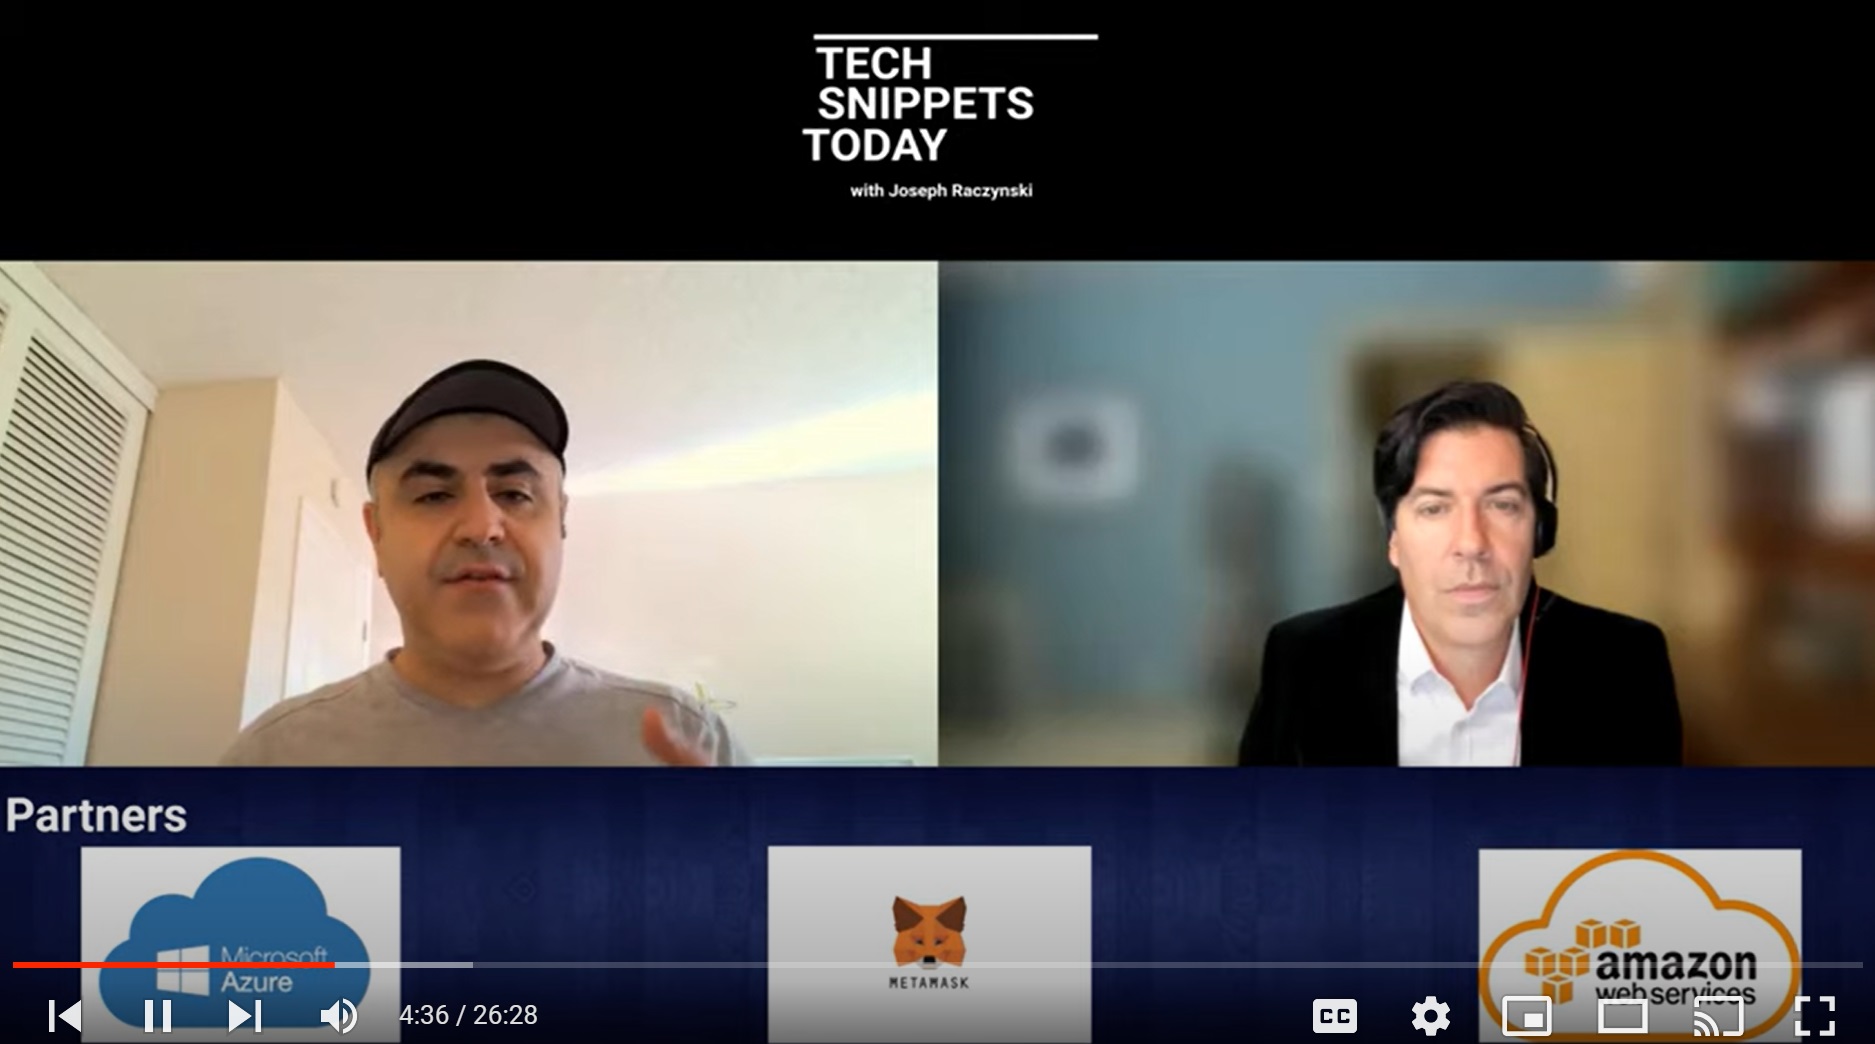 Tech Snippets Today (VIDEO INTERVIEW) – Senpex - Anar Mammadov - Technical Co-Founder, with Joseph Raczynski